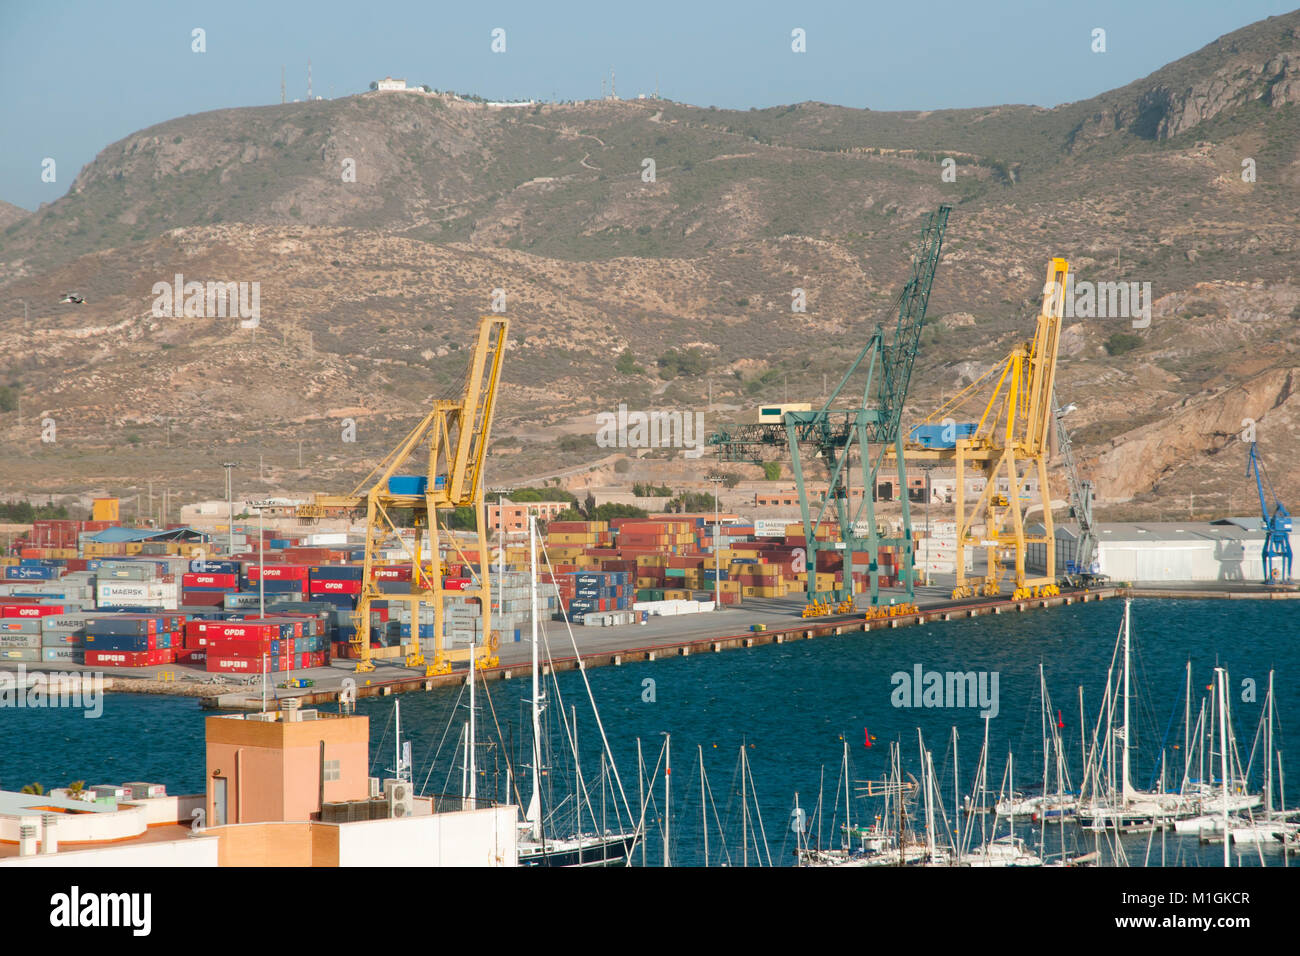 CARTAGENA, SPAIN - 28, 2016: Commercial cranes & shipping containers in the port of Cartagena Stock Photo